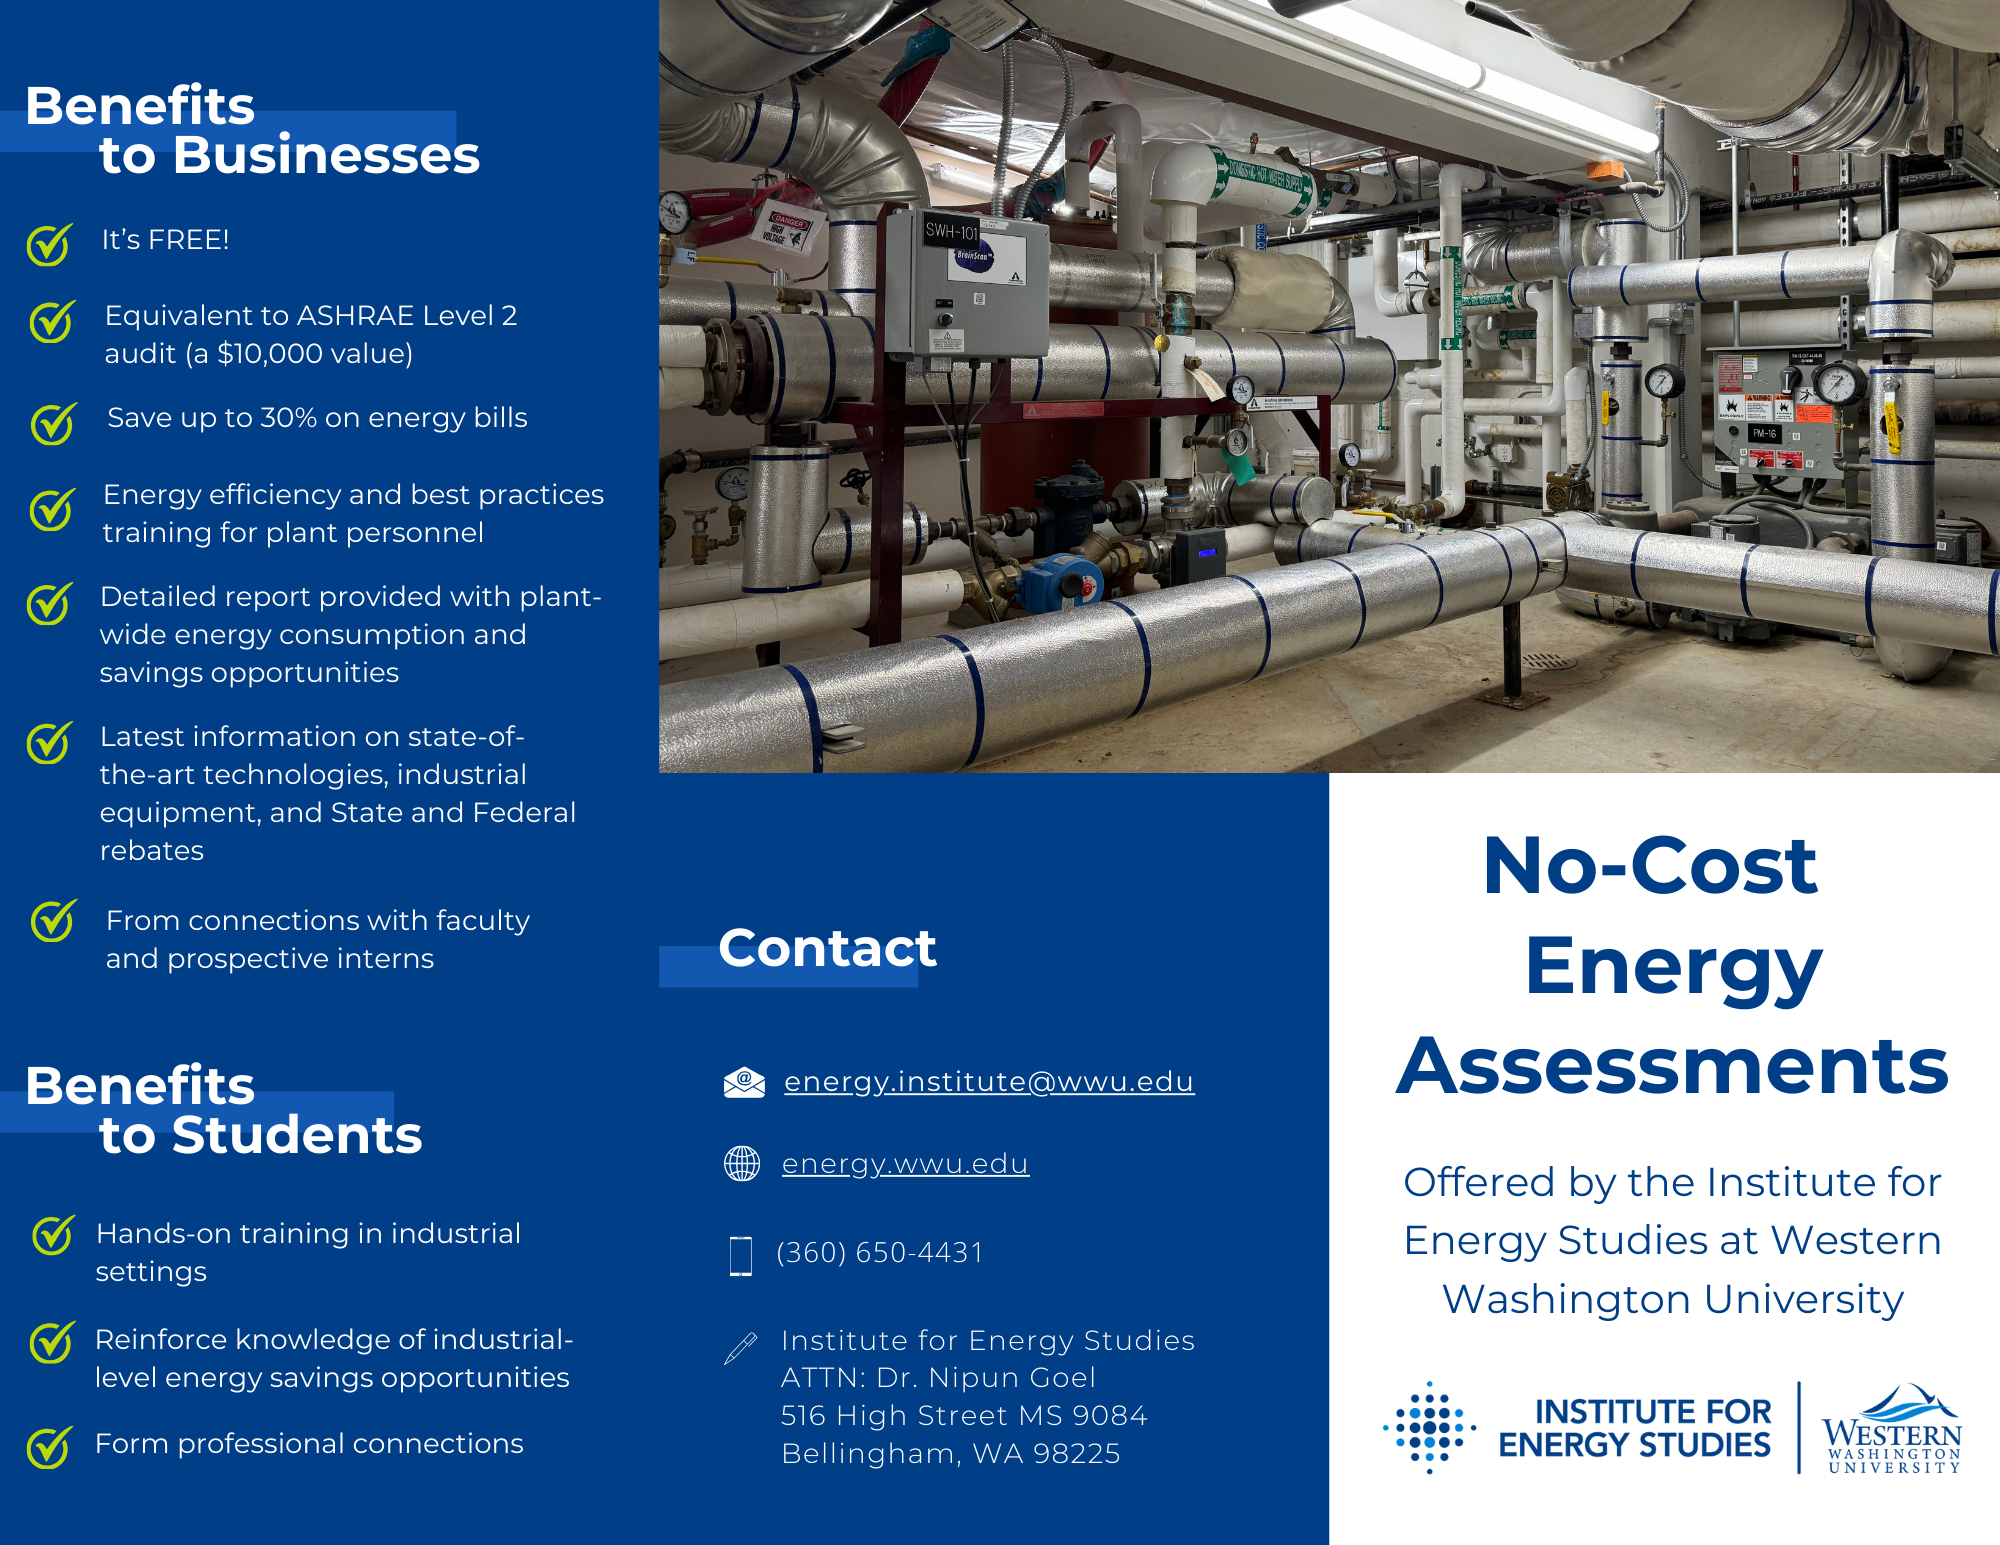 Page 1 of an explanatory brochure about the no-cost energy assessments offered by the Institute for Energy Studies